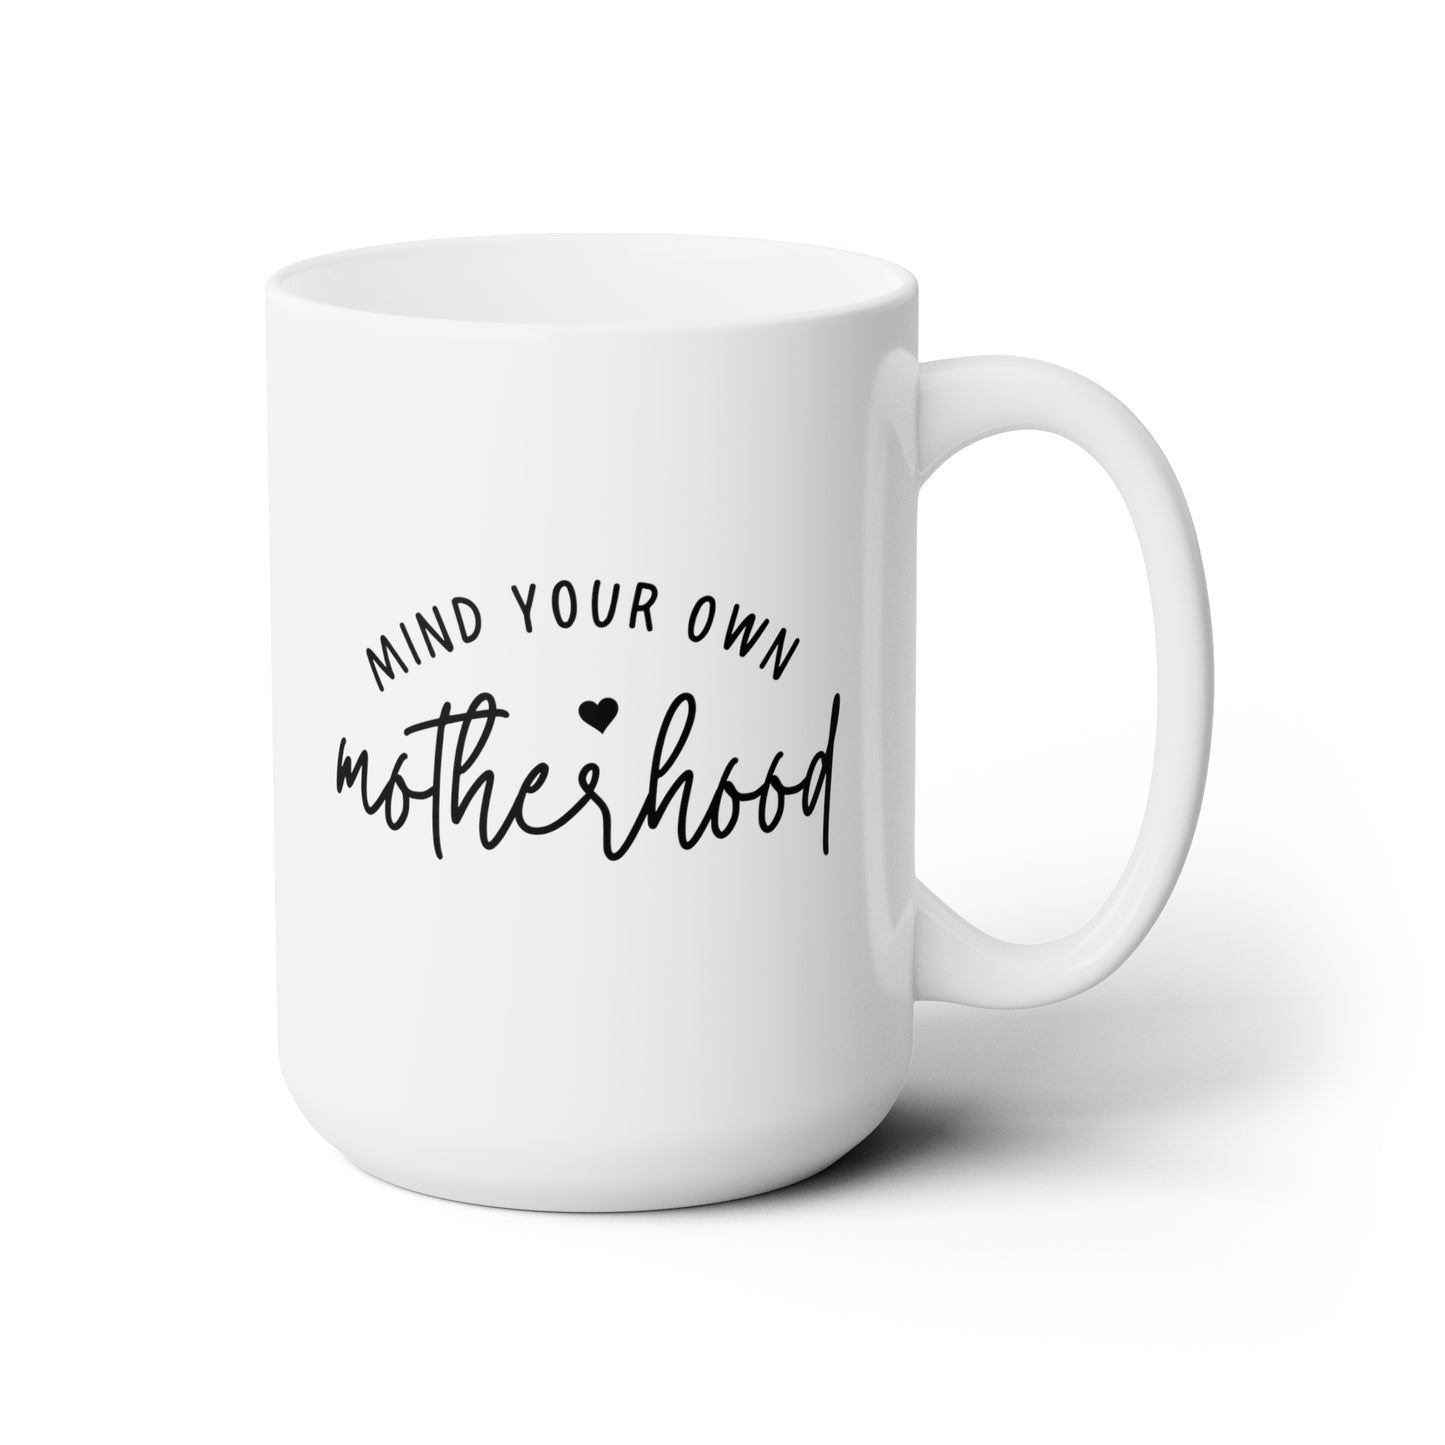 Mind Your Own Motherhood 15oz white funny large coffee mug gift for sassy new mom mother's day mama pregnancy announcement waveywares wavey wares wavywares wavy wares